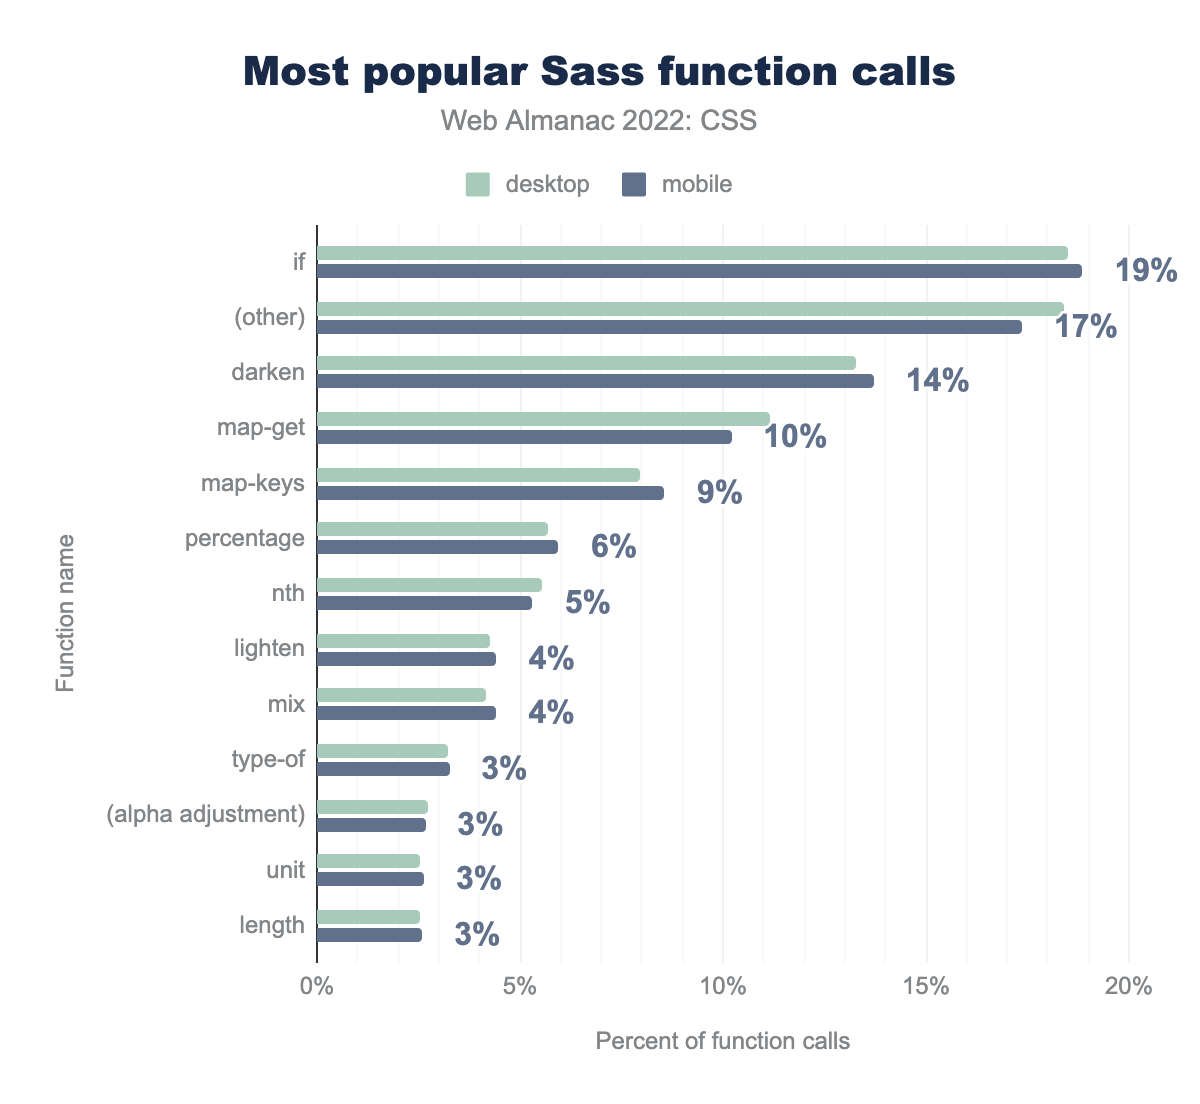 Most popular Sass function calls by percent of calls.